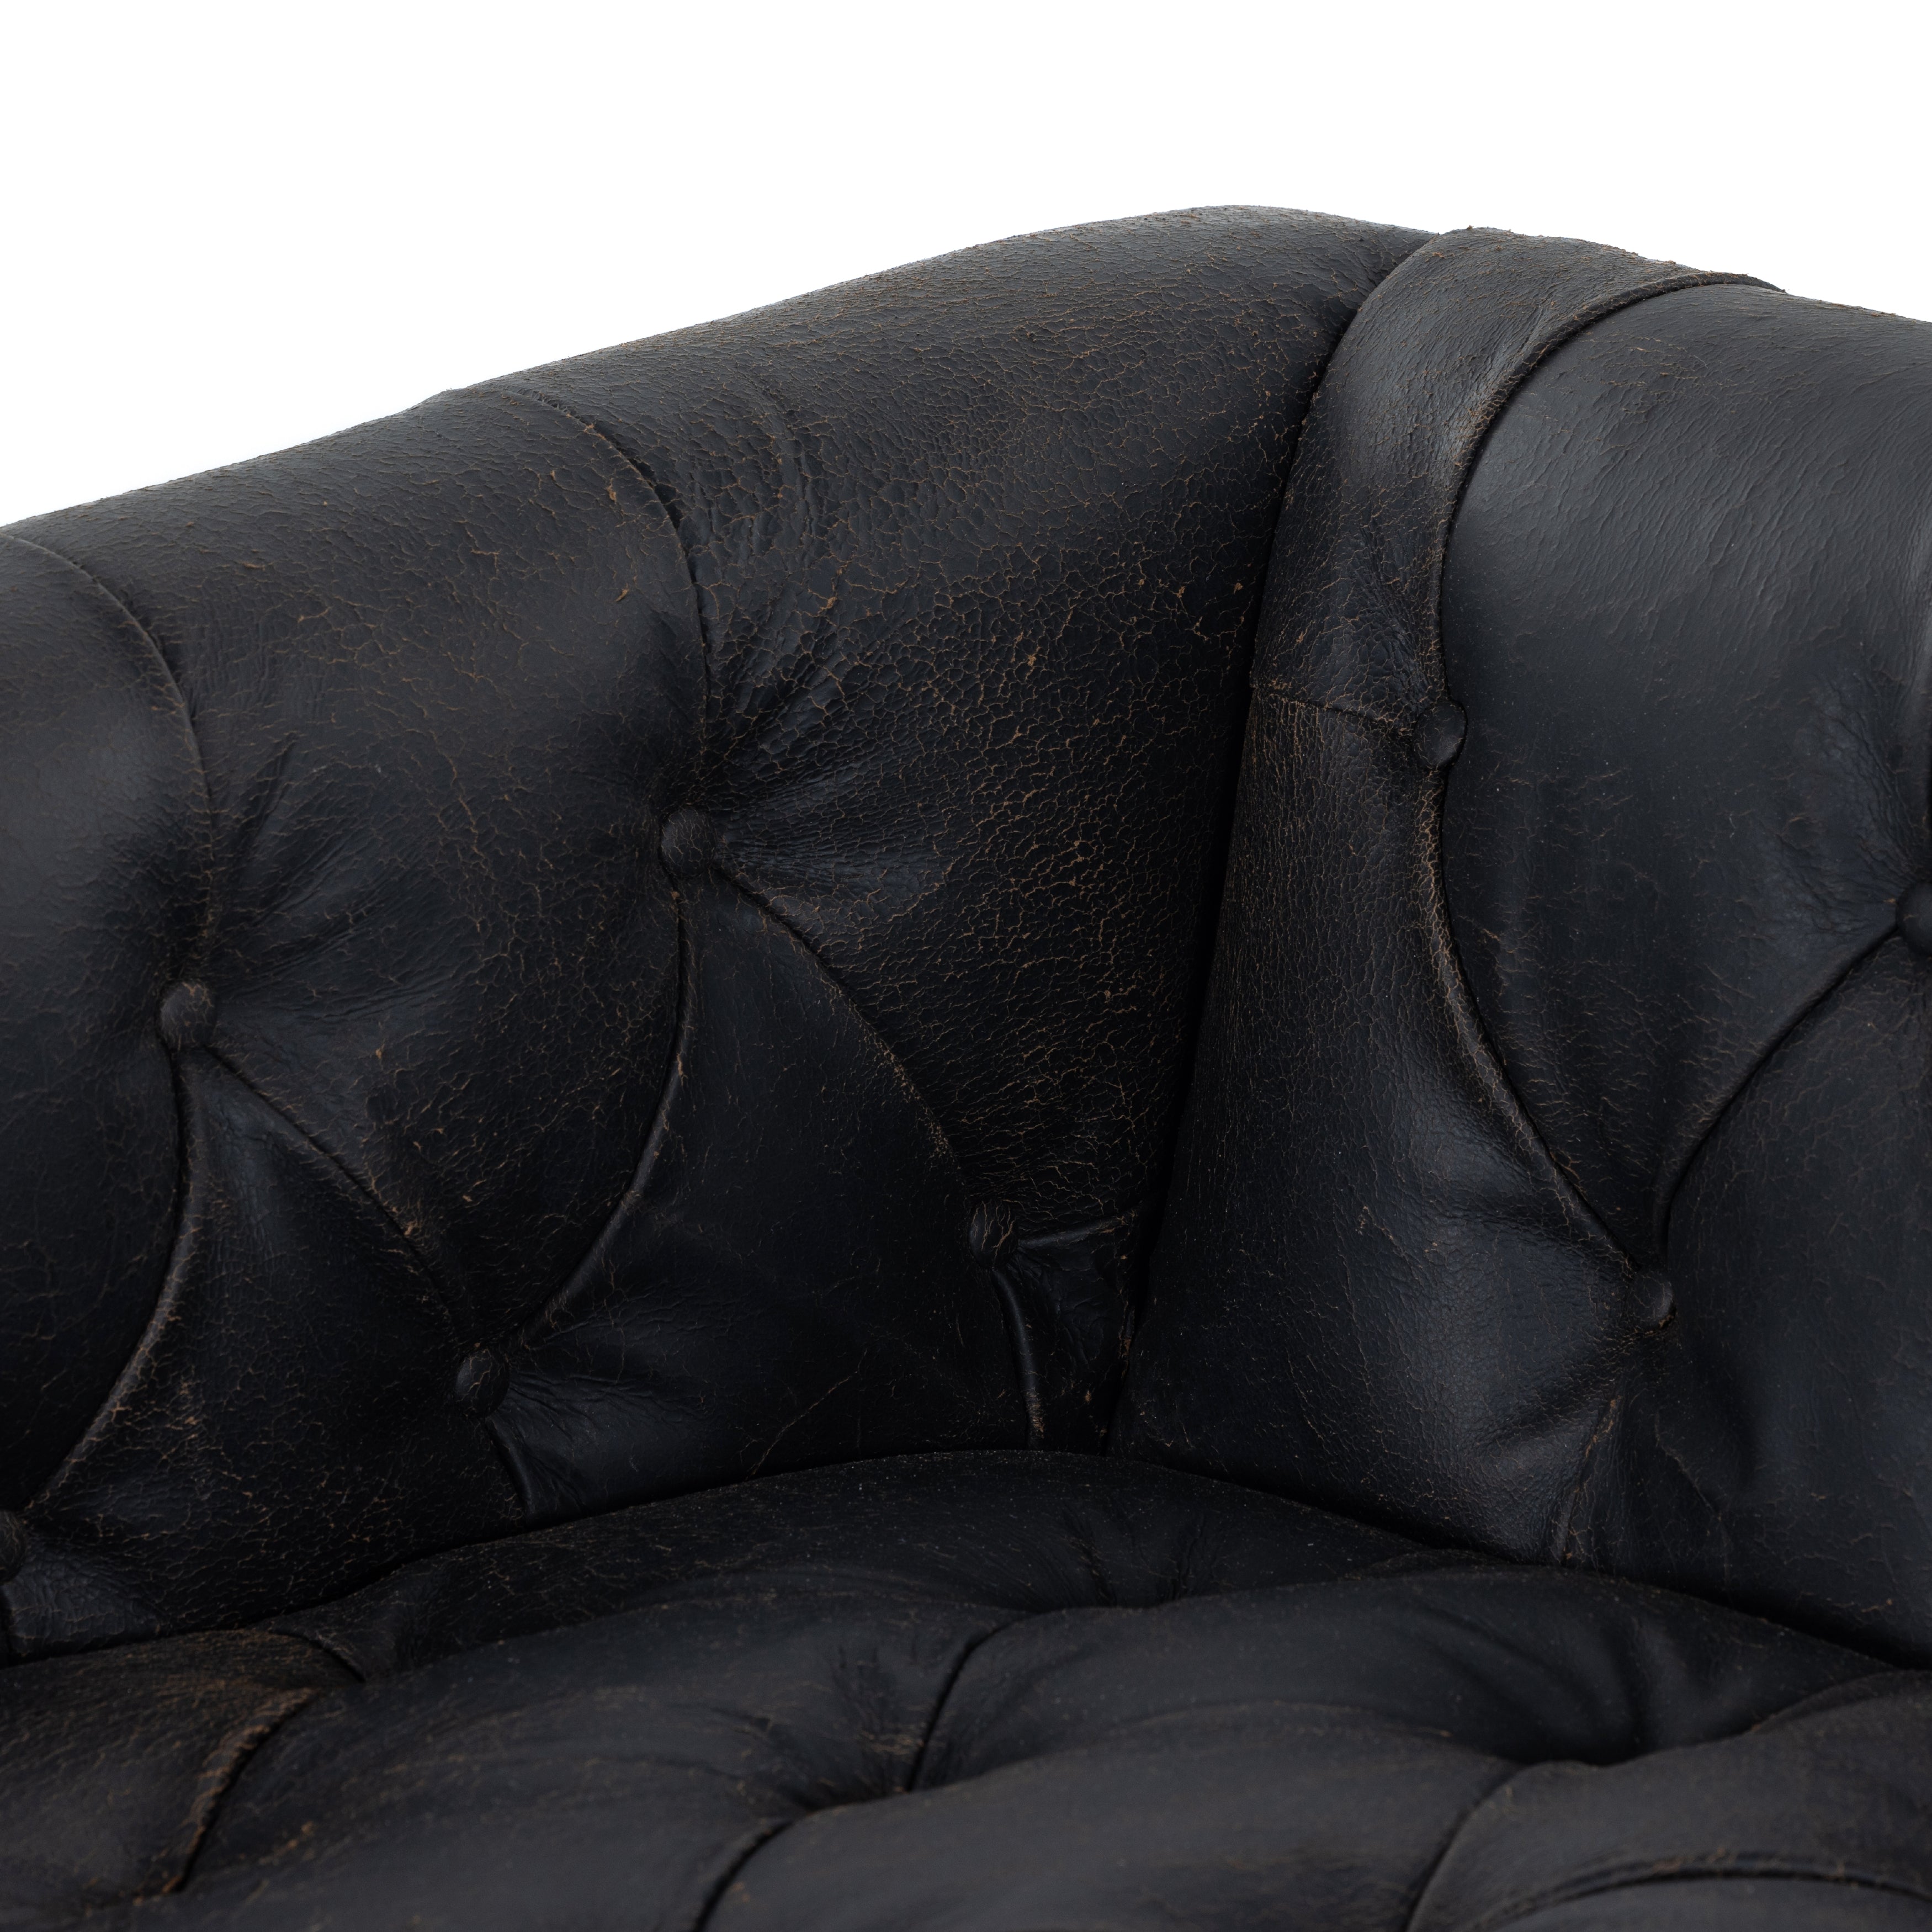 Manchester Leather Sofa